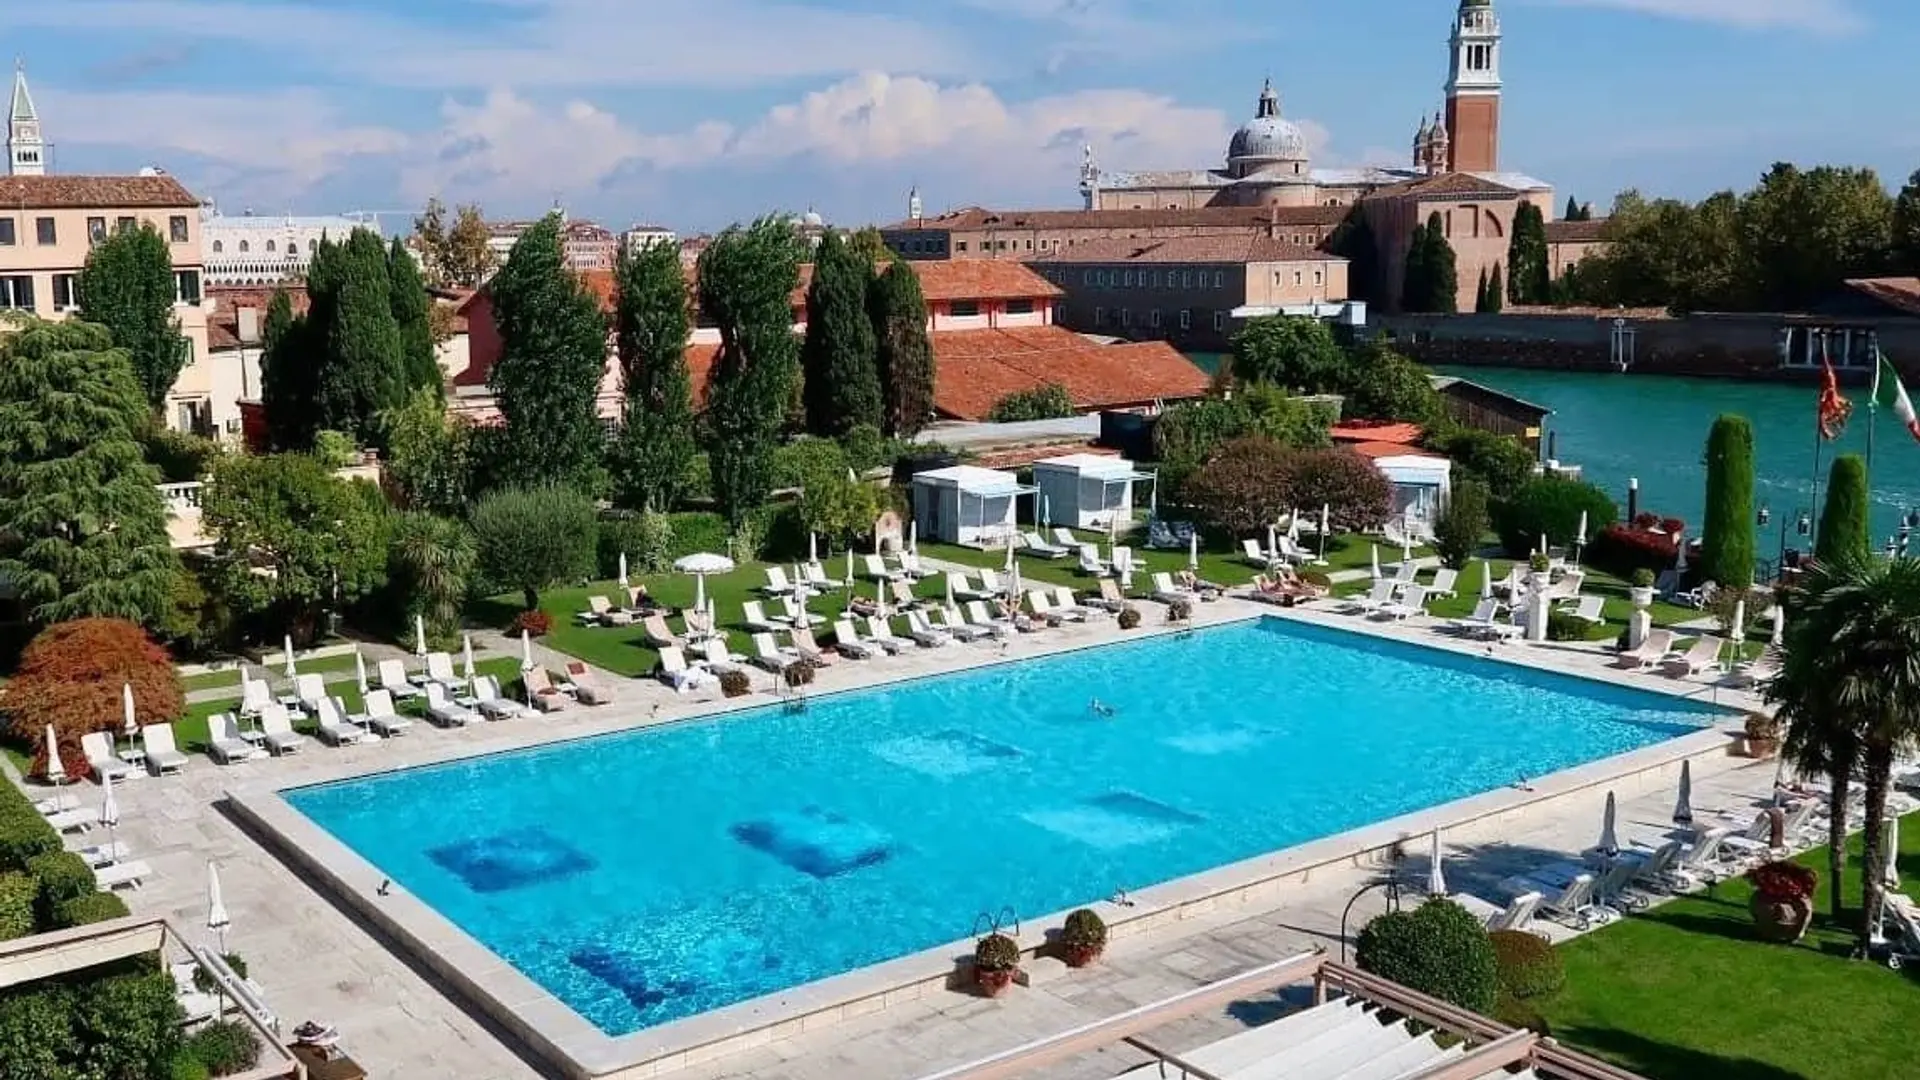 Bird view of the pool area at Belmond Hotel Cipriani at daytime